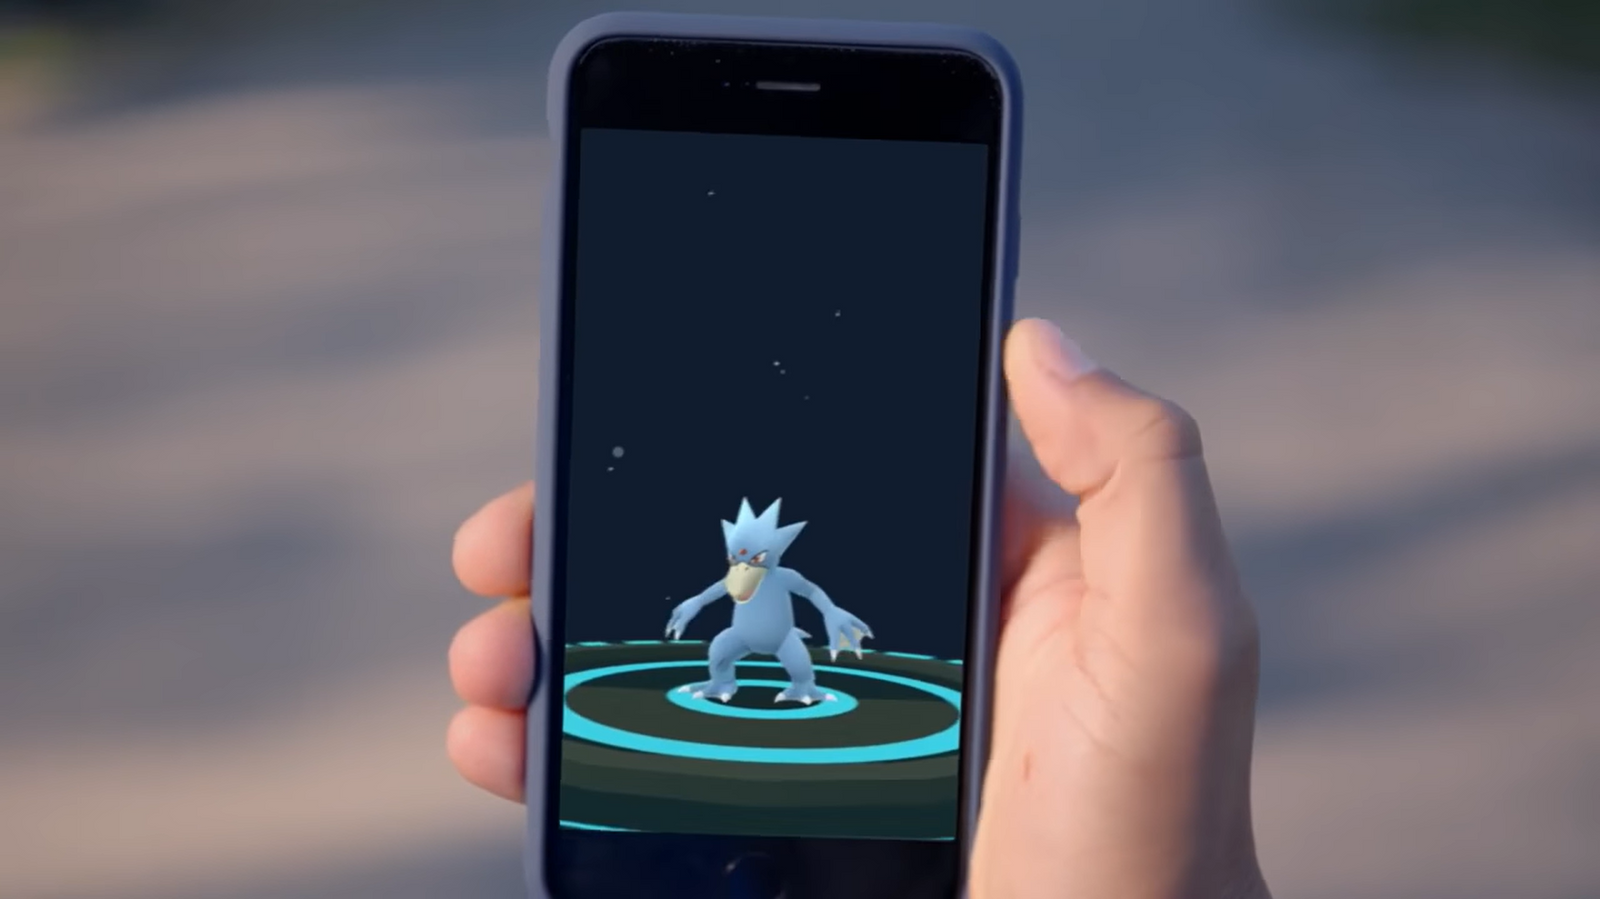 Player holding a phone showing their Golduck in Pokemon GO.